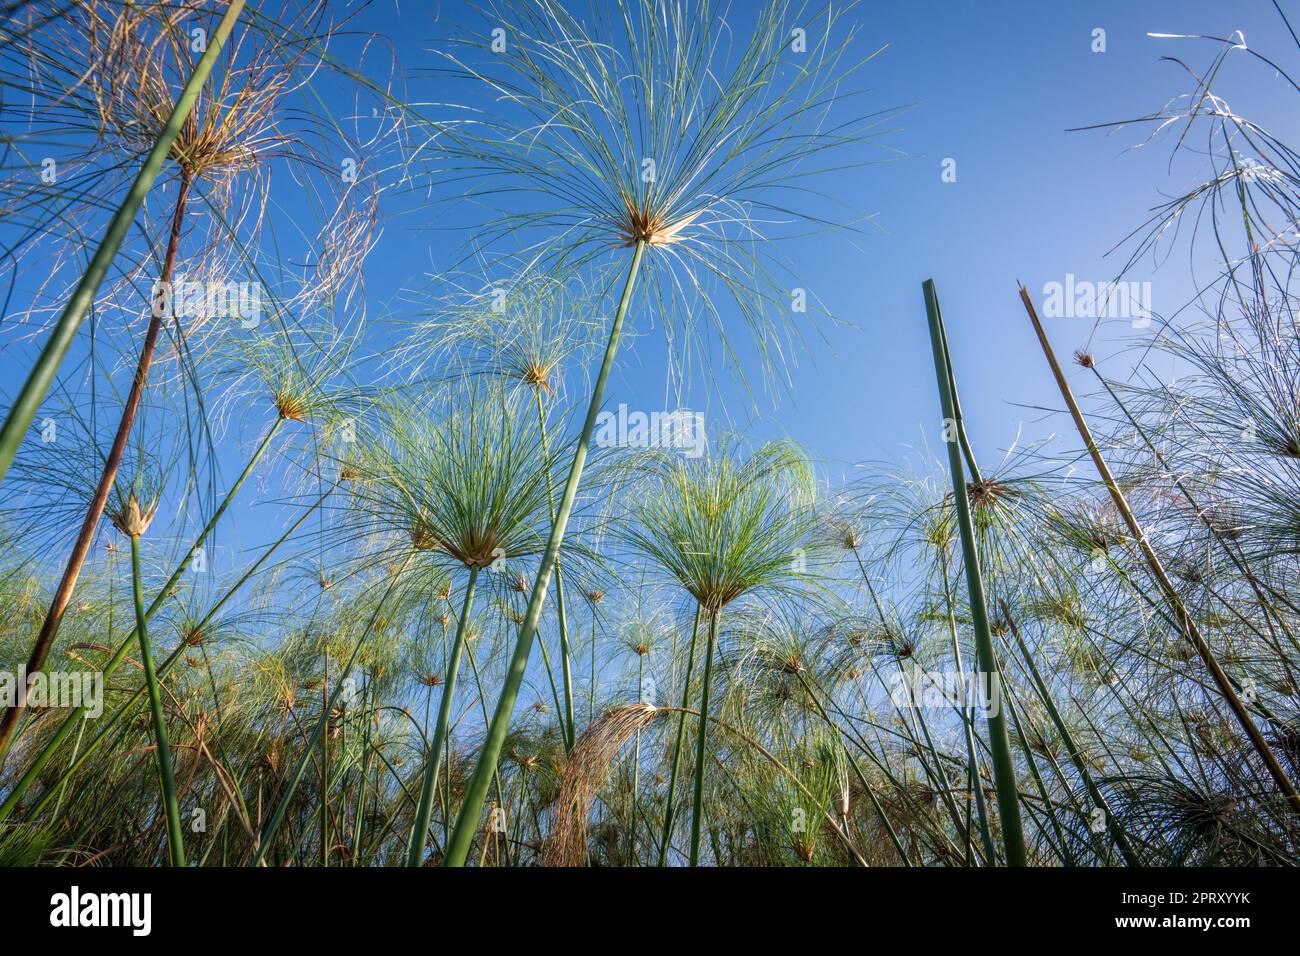 Papyrus seed heads (Cyperus papyrus) against blue sky. Caprivi strip, Kwando River, Bwabwata National Park, Namibia, Africa Stock Photo